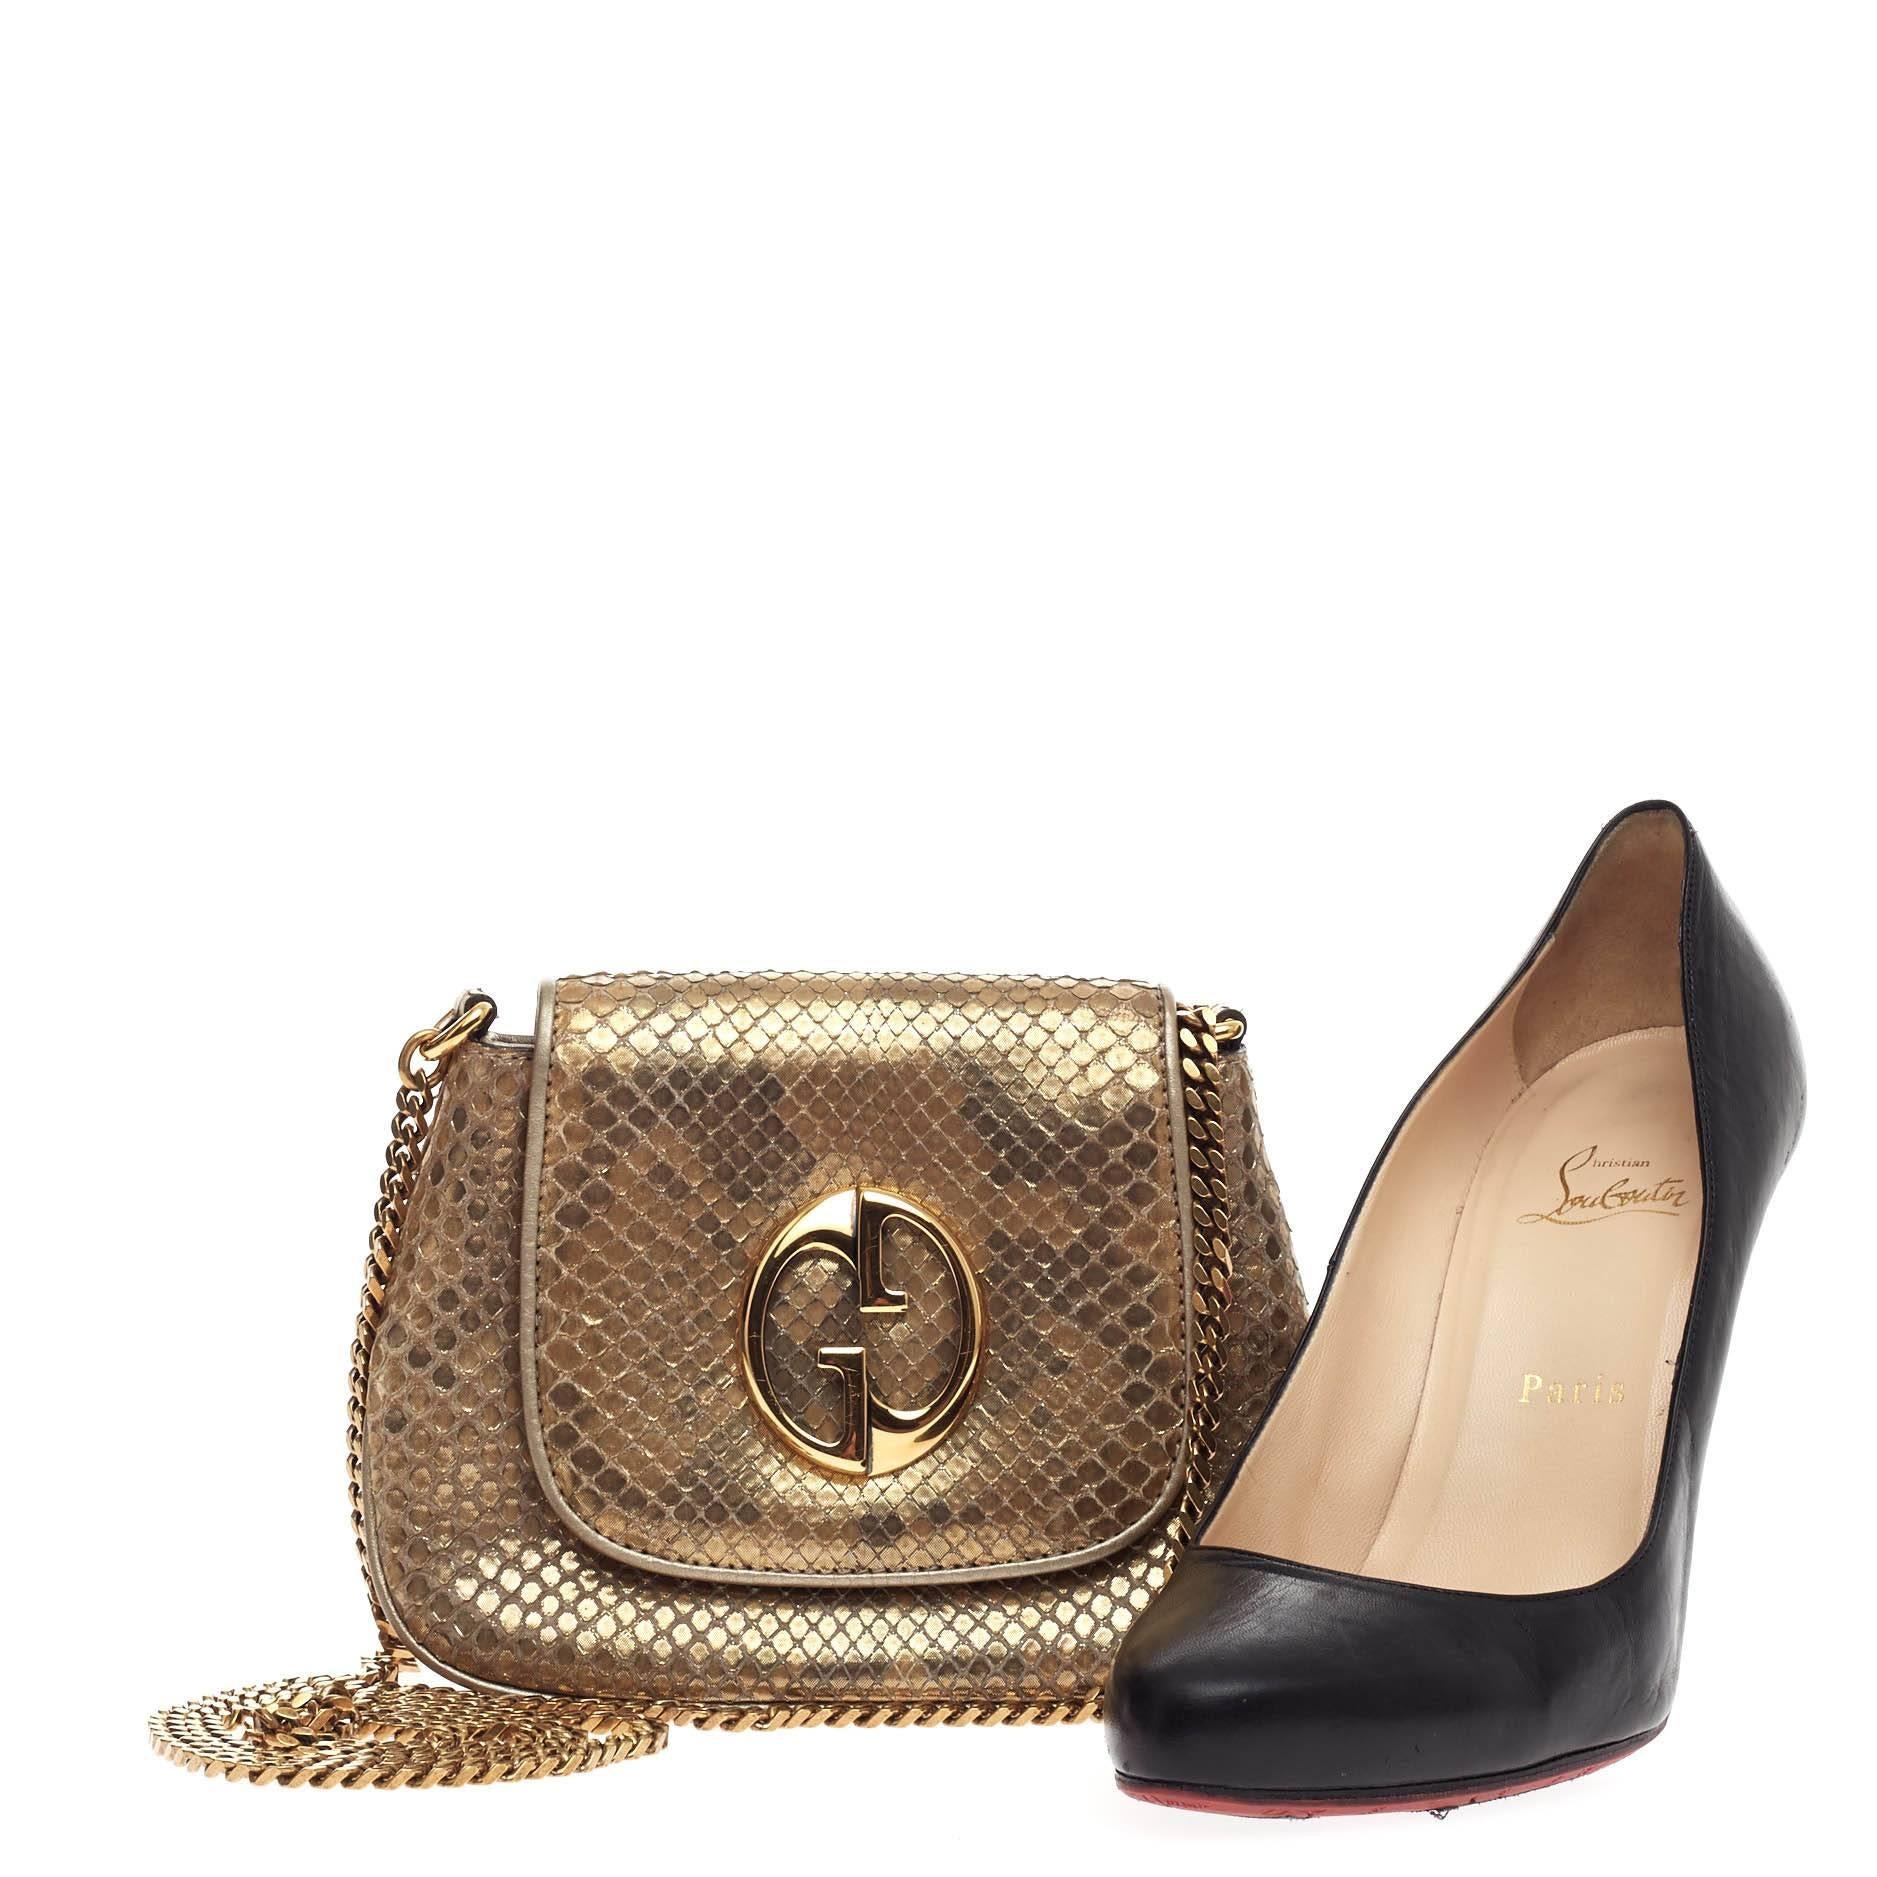 This authentic Gucci 1973 Crossbody Python Small is a classic for Gucci lovers. Crafted from gold genuine python skin, this crossbody features gold  double G detailing on its flap, chain link strap, and gold-tone hardware accent. Its hidden magnetic